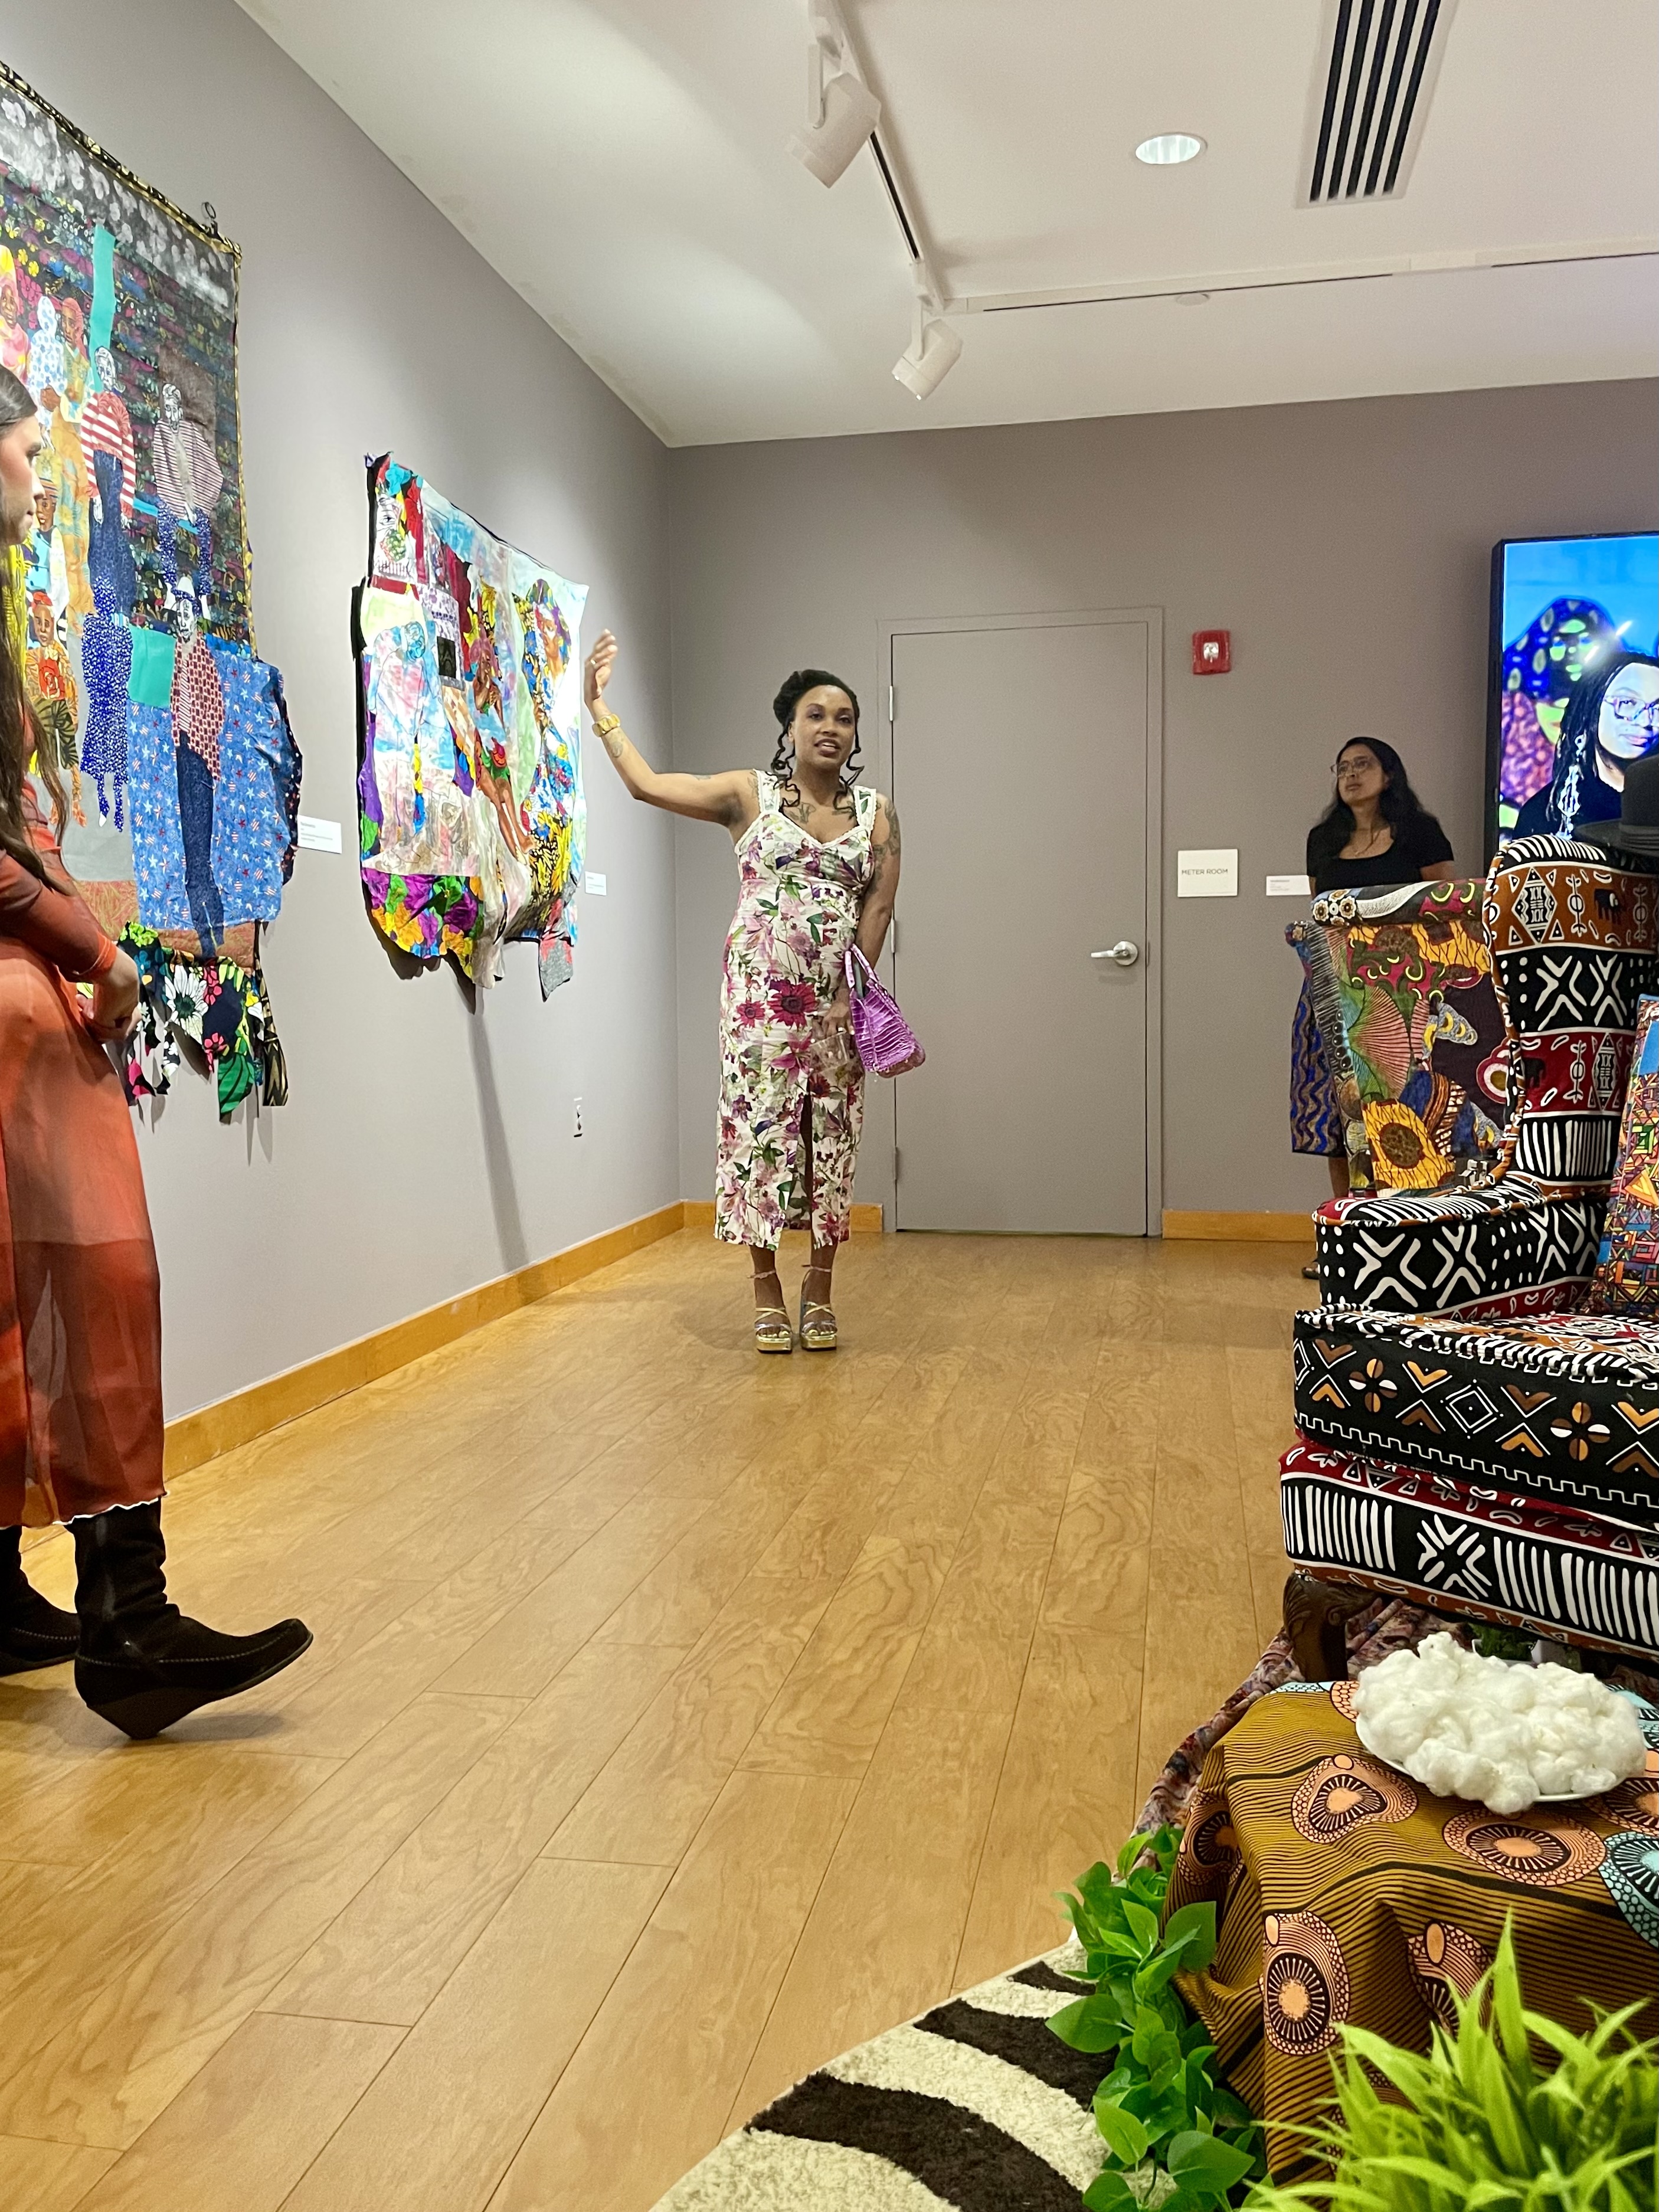 Zsudayka Nzinga at her exhibition opening pointing to one of her artworks on view